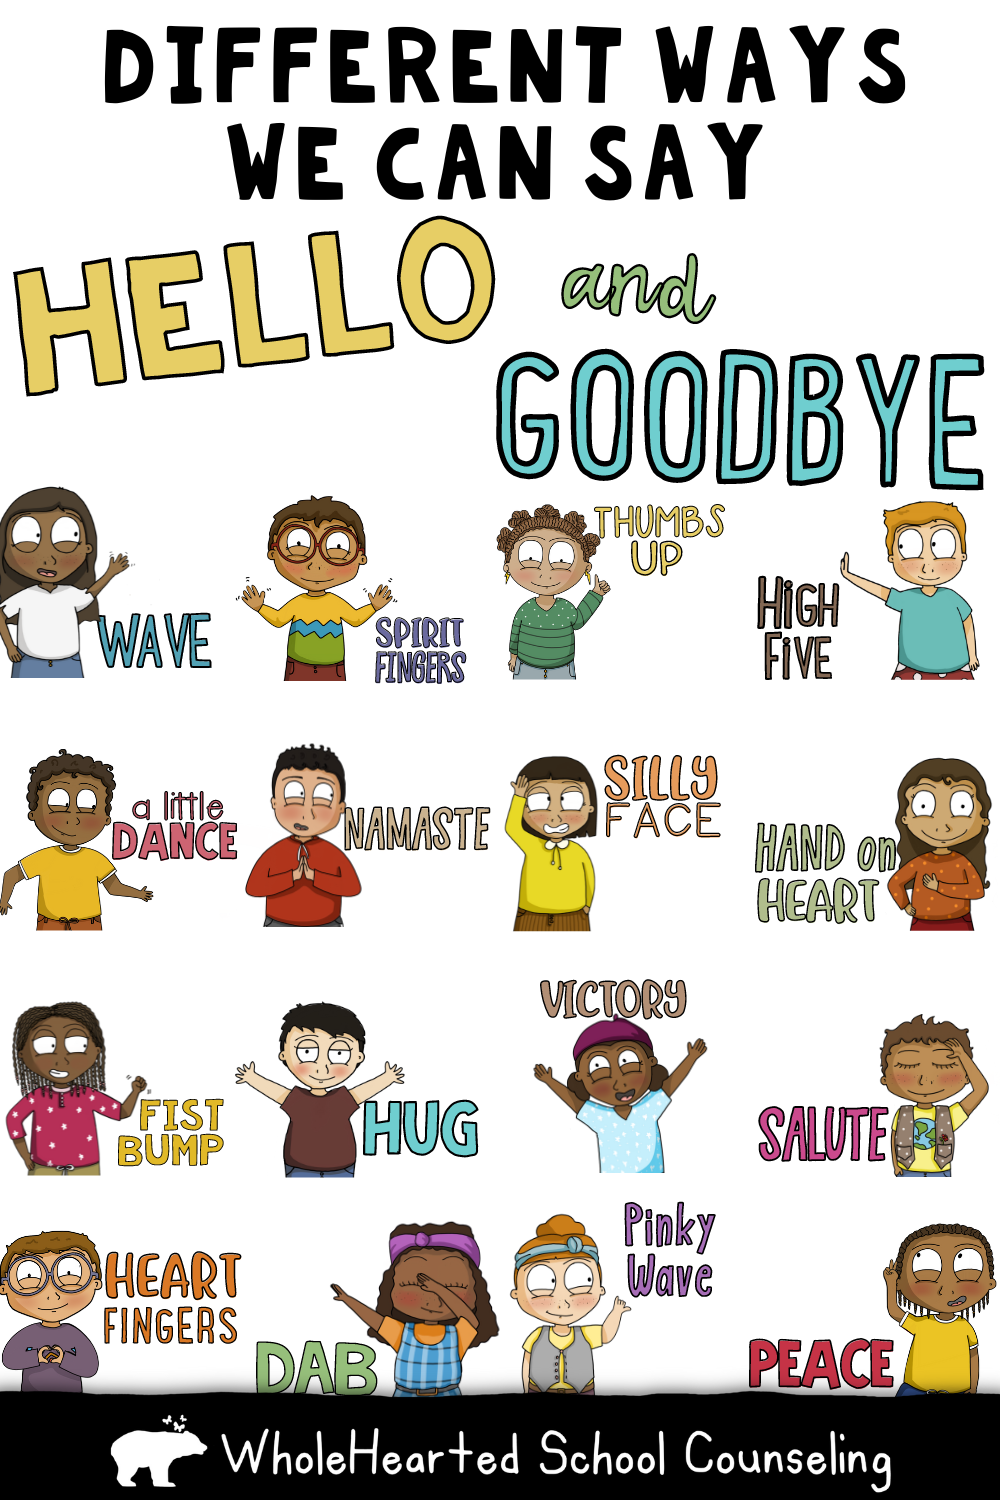 16 different classroom greetings for elementary school visual support poster.